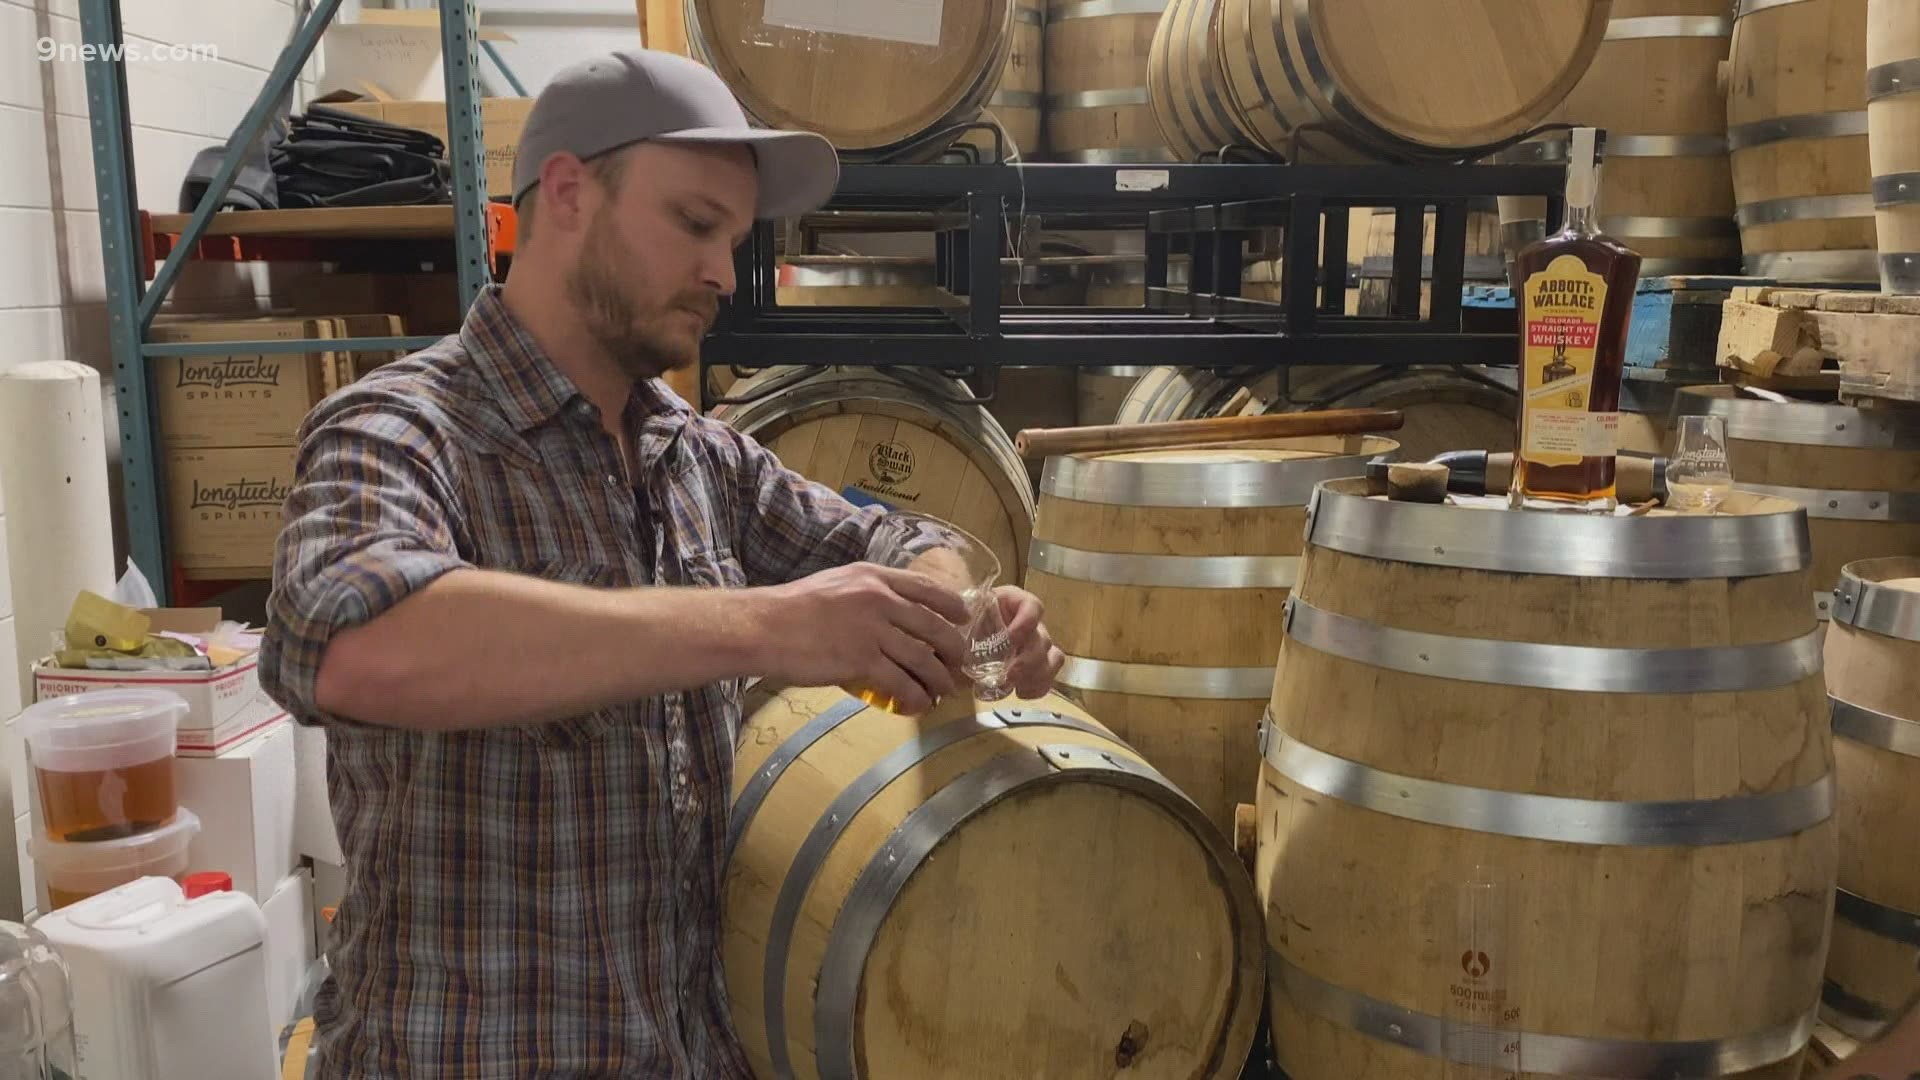 Colorado is making a name for itself when it comes to craft spirits, especially whiskey. Here's an inside look into how whiskey is distilled at one Longmont business